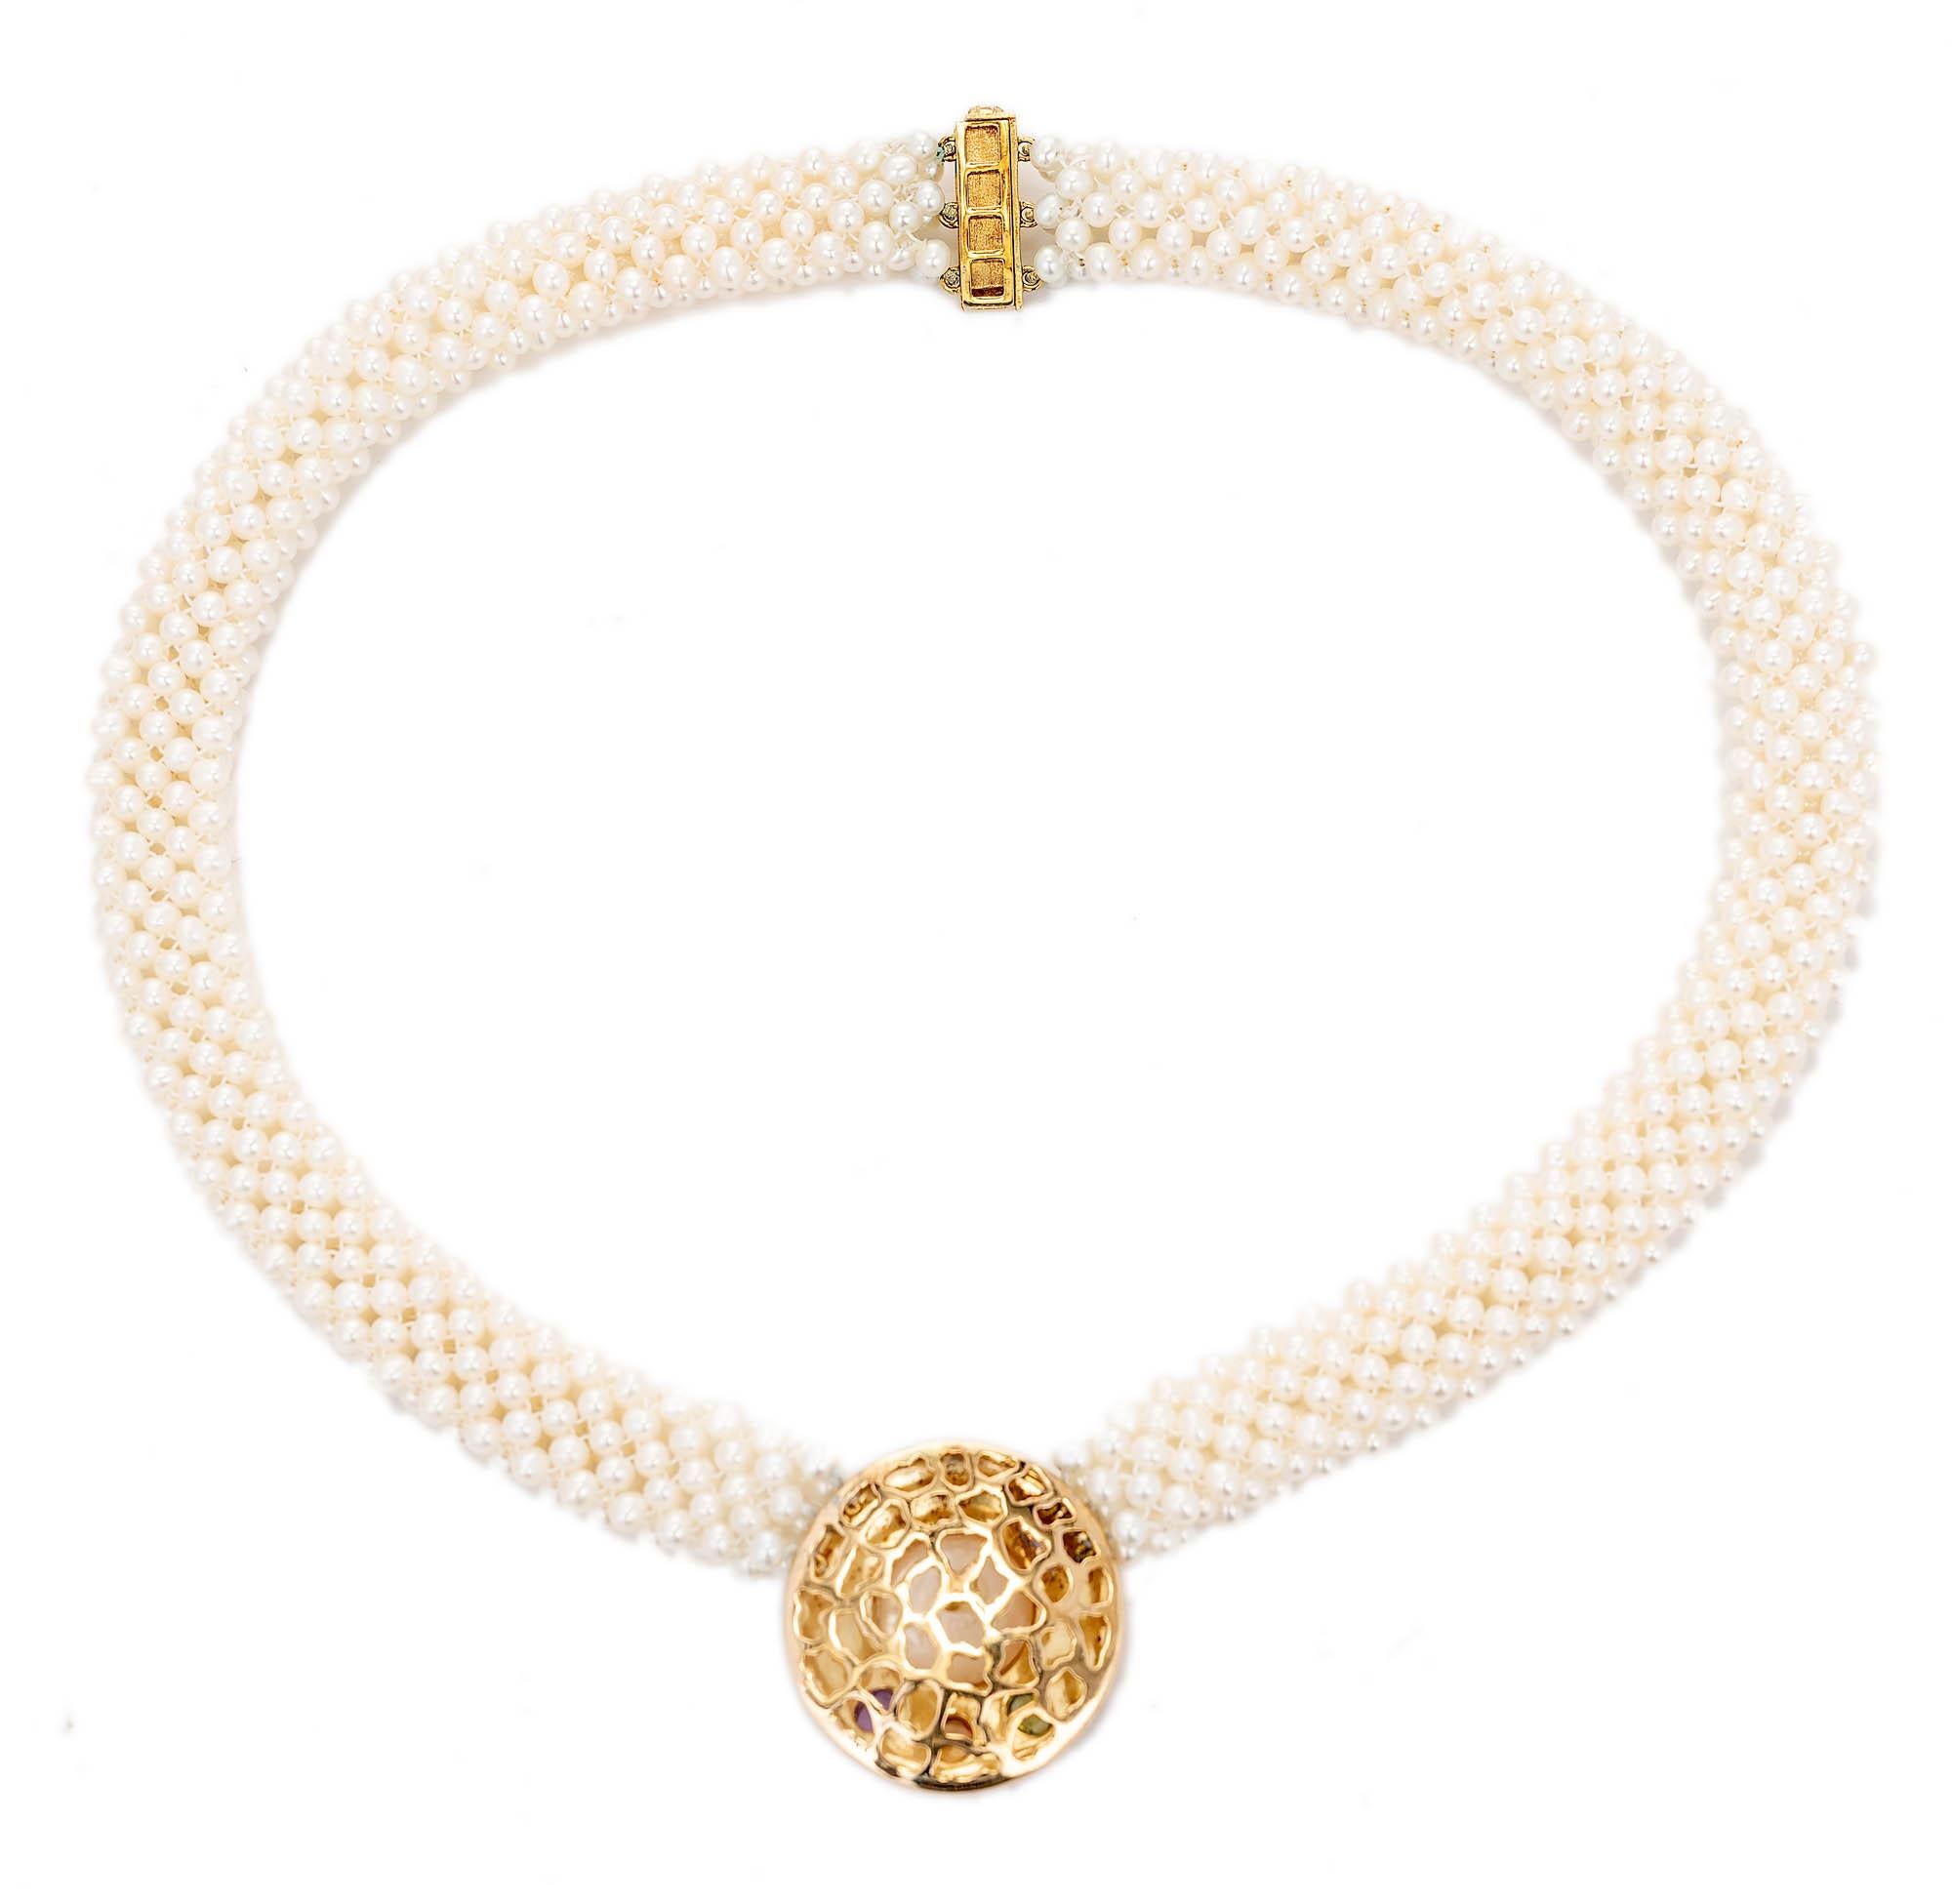 Twelve Strand three-dimensional pearl necklace with an 18k centerpiece made of textured yellow gold with a 12mm mabe pearl bezel set in the center and three  gem stones set underneath the pearl.

1 mabe pearl 12mm
3 oval cabochon Amethyst, citrine